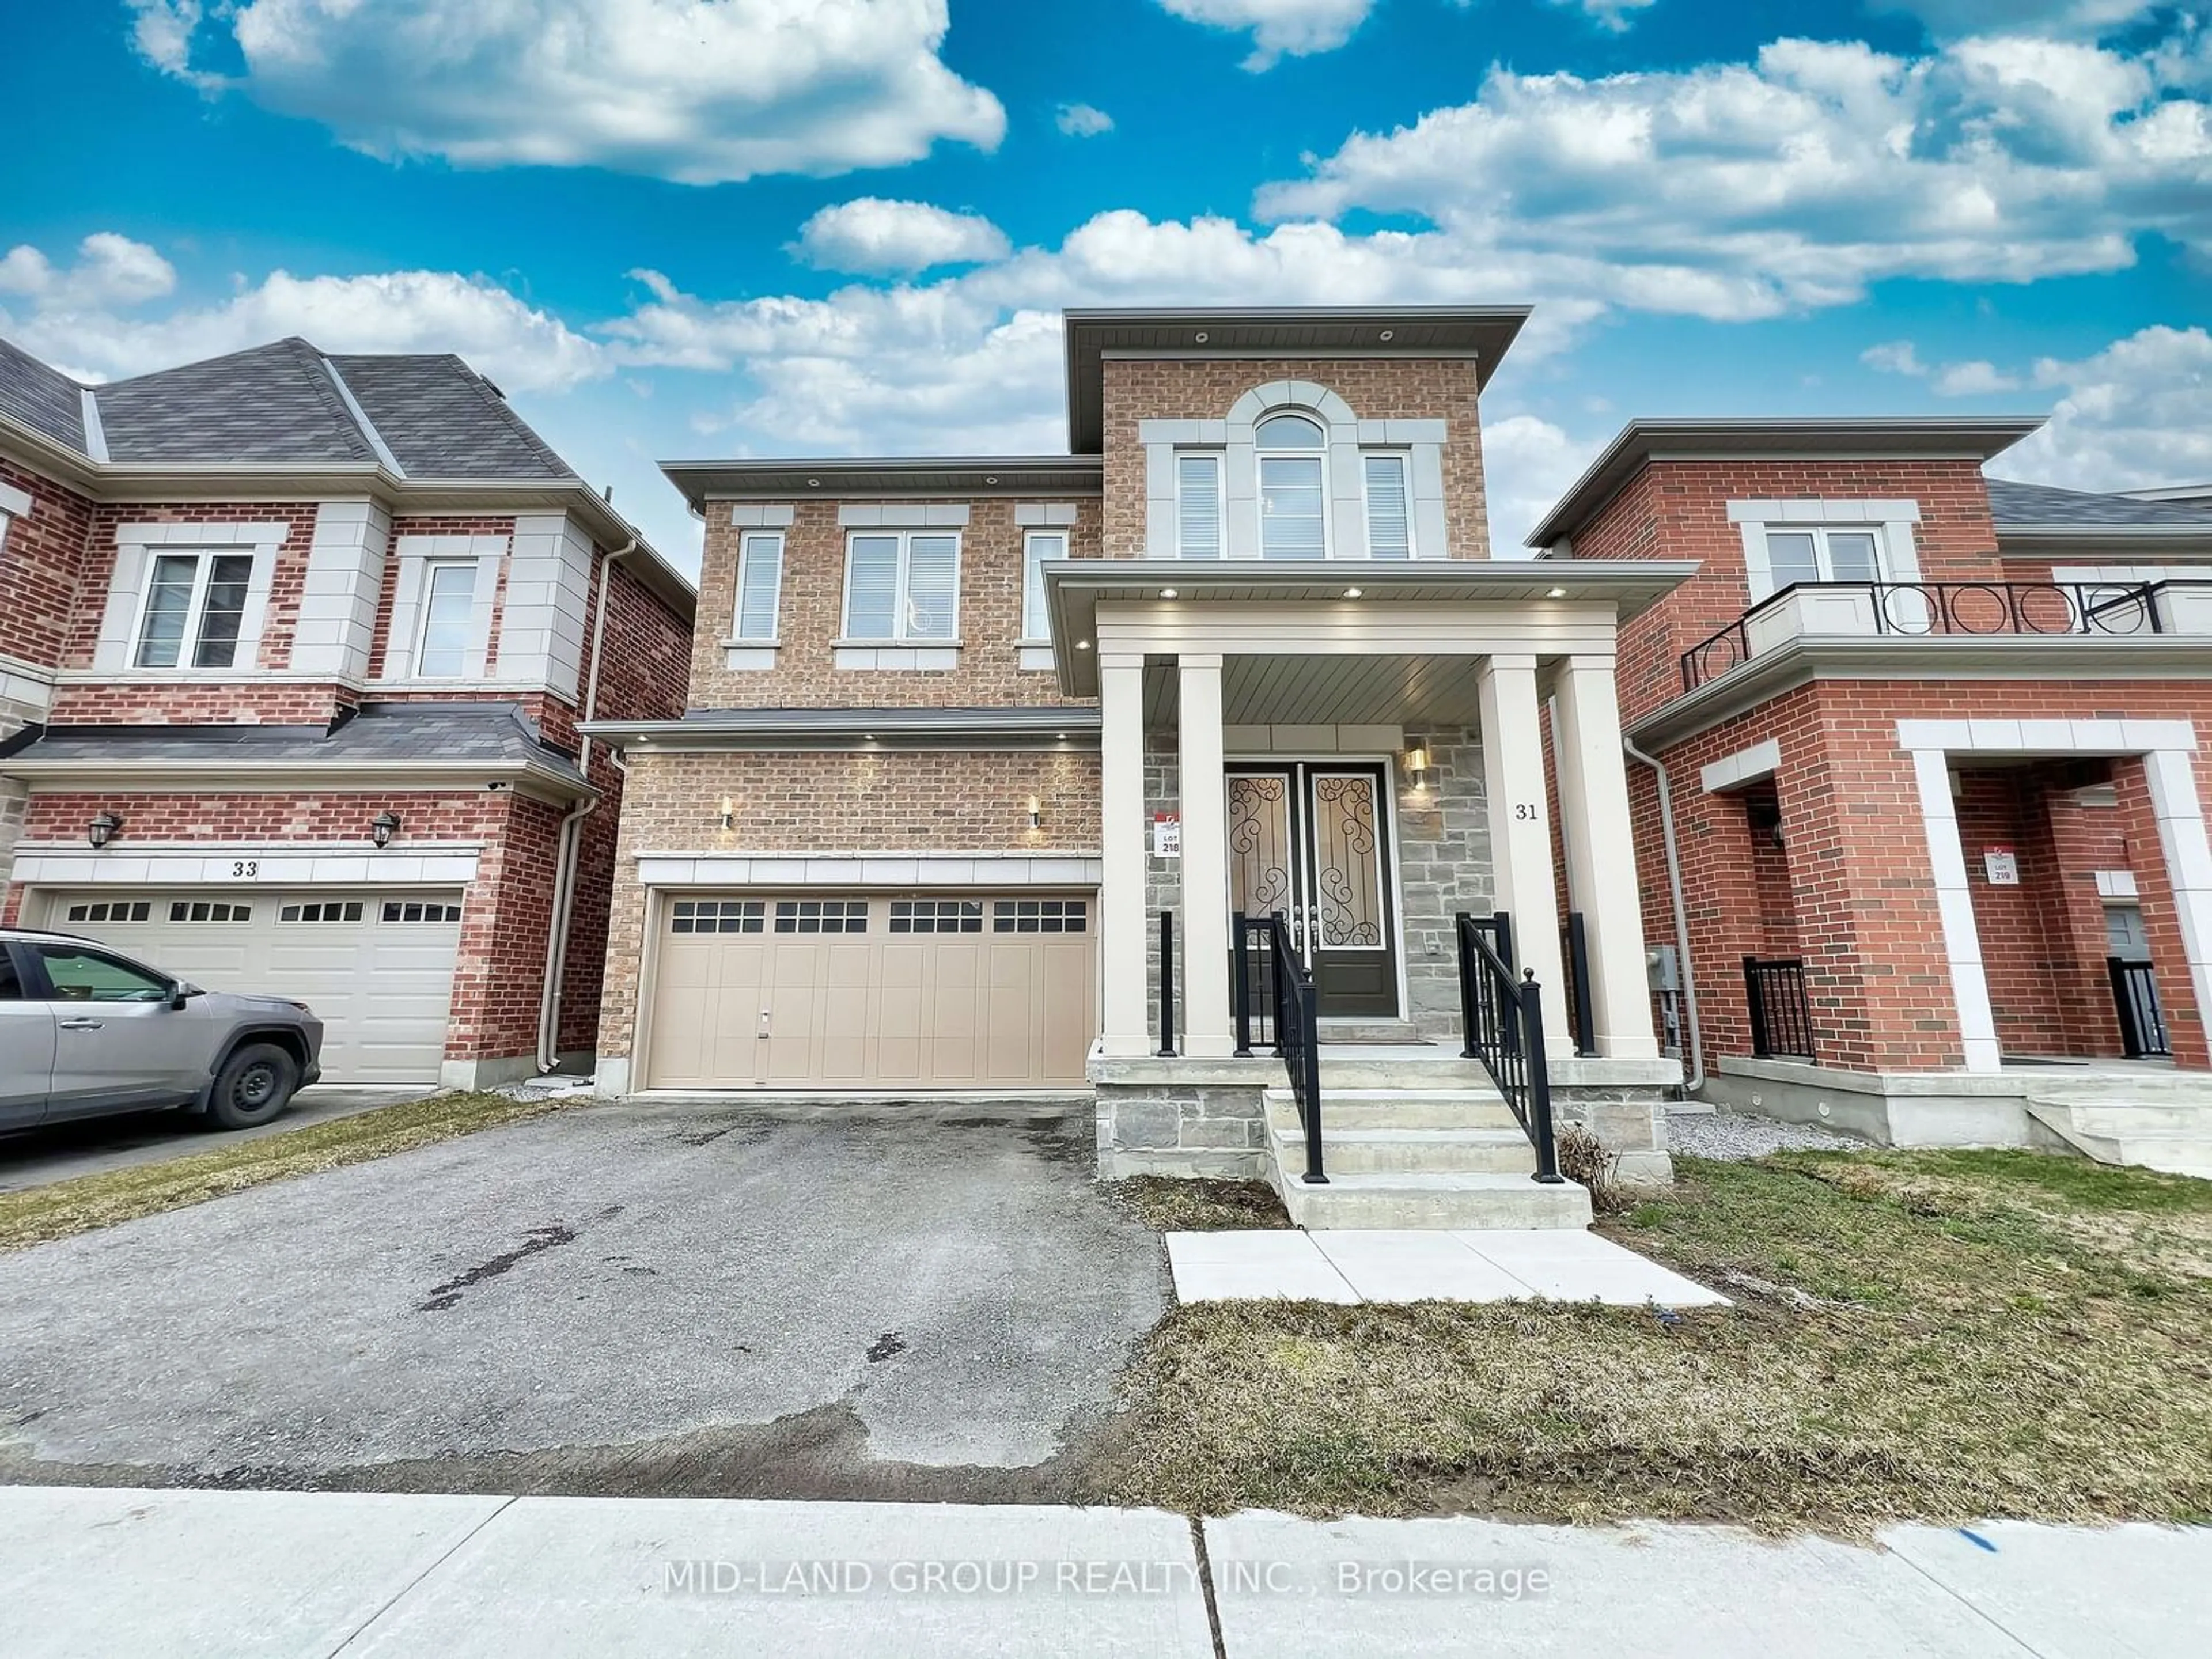 Home with brick exterior material for 31 Planet St, Richmond Hill Ontario L4C 4Y3